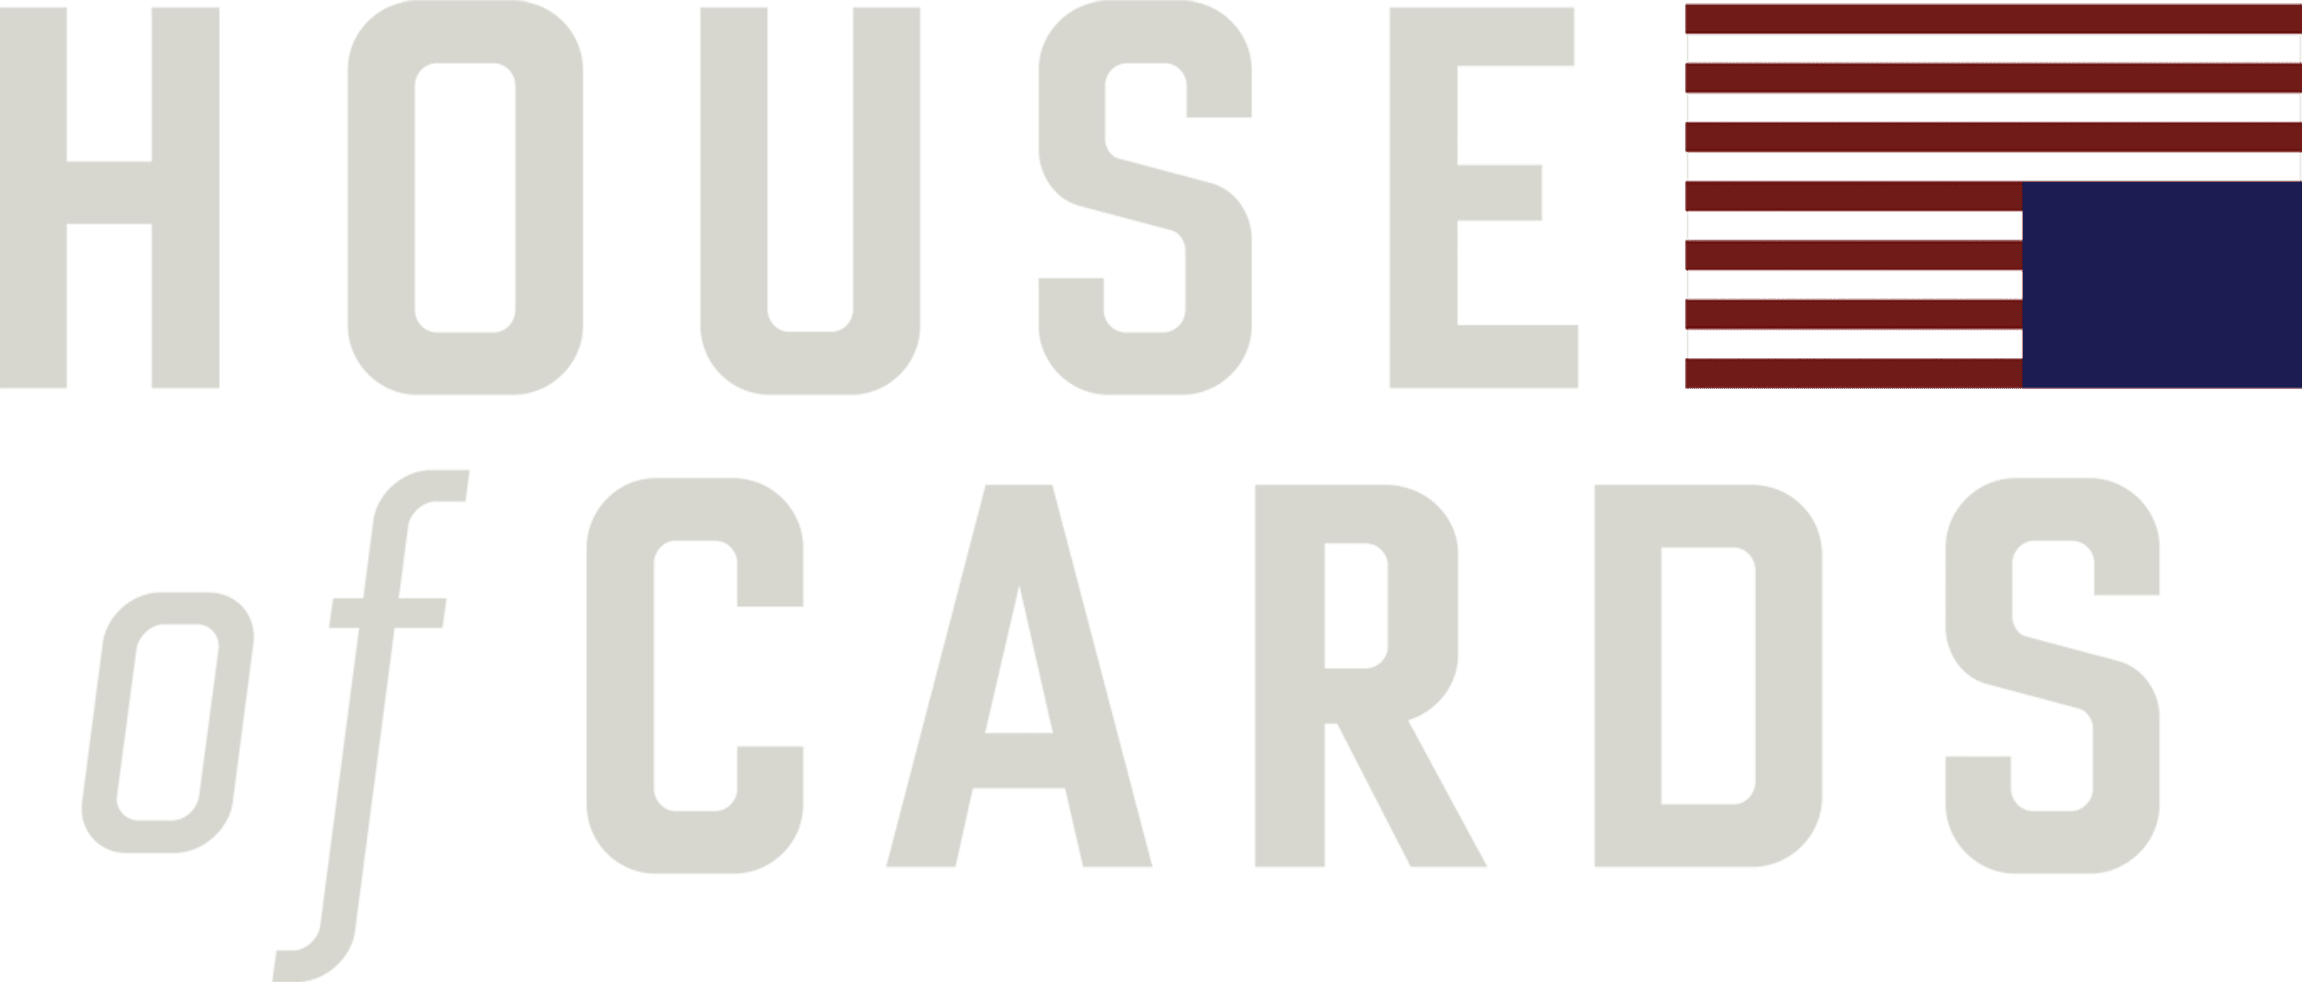 House of Cards logo